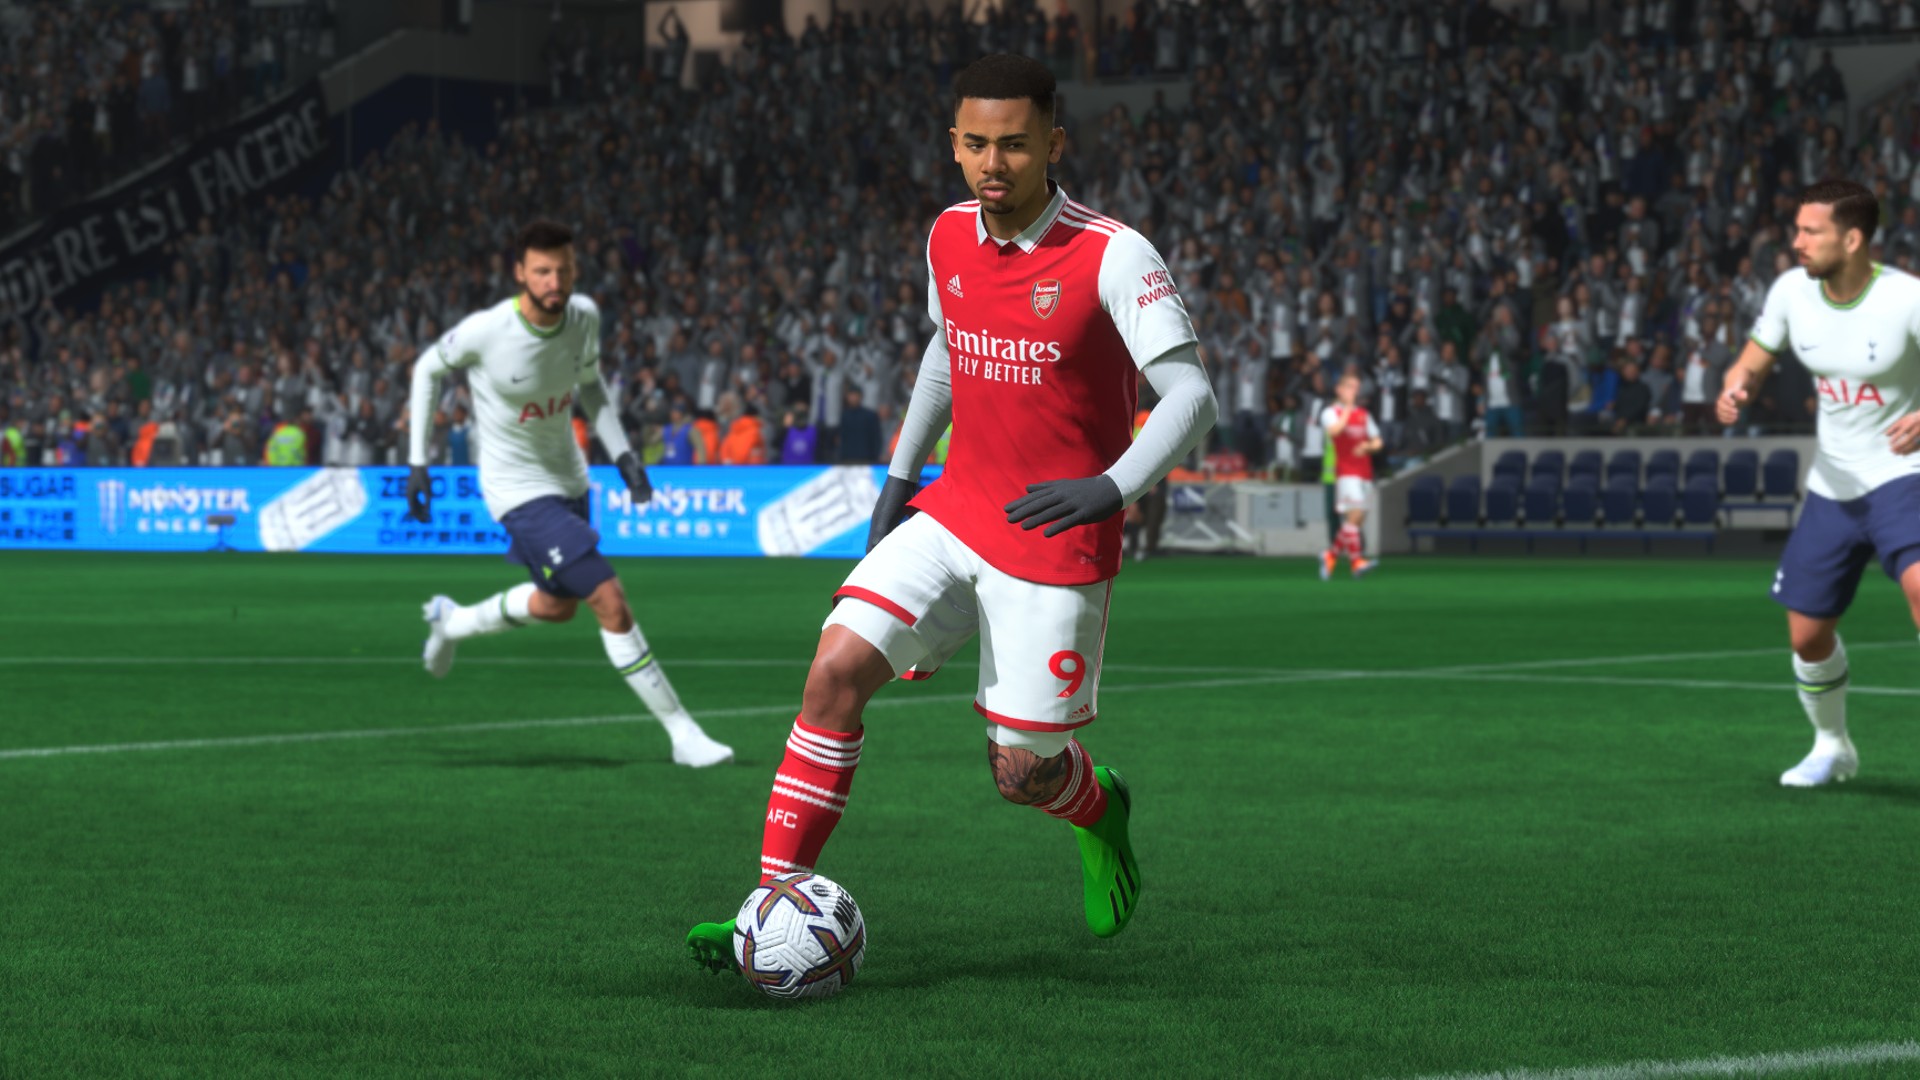 EA FC 24 Prime Gaming Pack released – but the free rewards are much worse  than FIFA 23 - Mirror Online